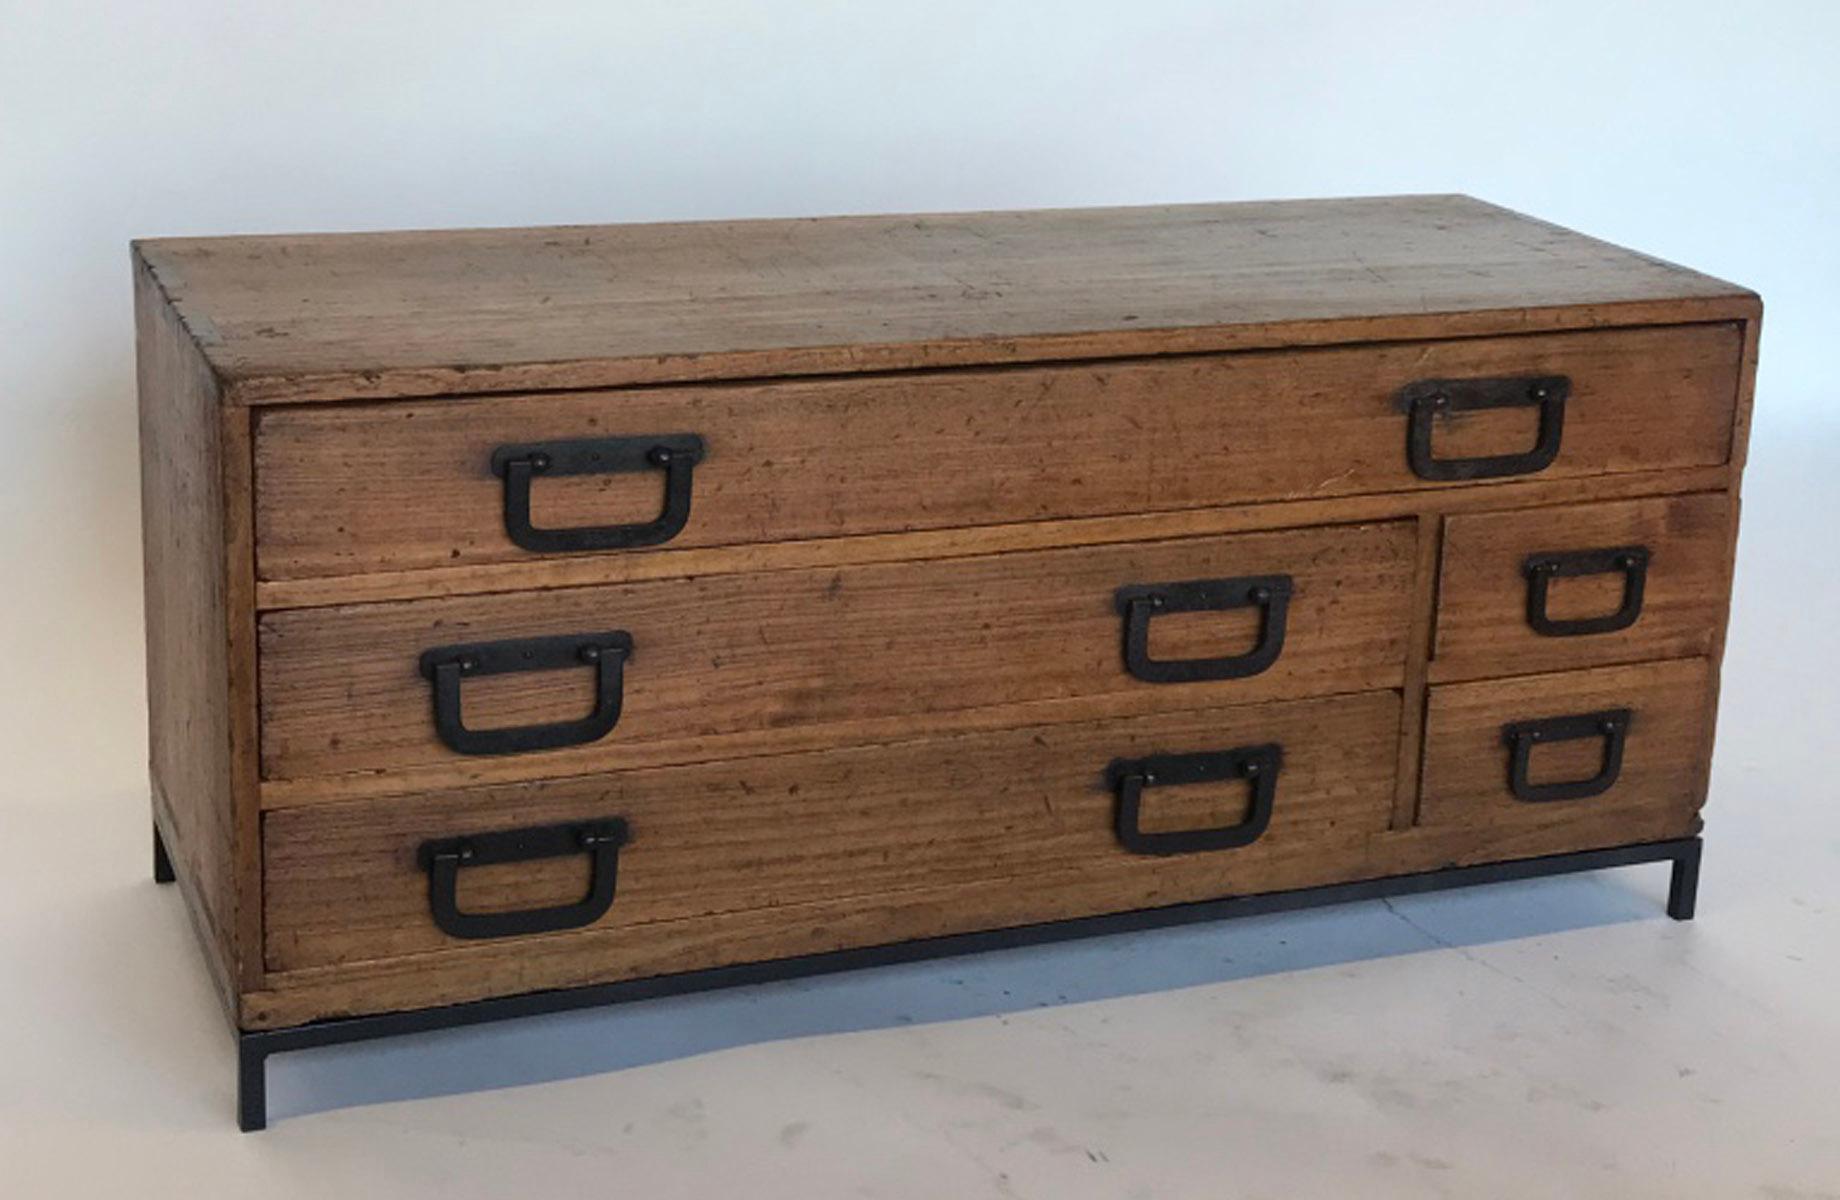 Edo period, Japanese sword chest with five sturdy and functional drawers. Robust, masculine handles, all original. Atop contemporary custom iron base.